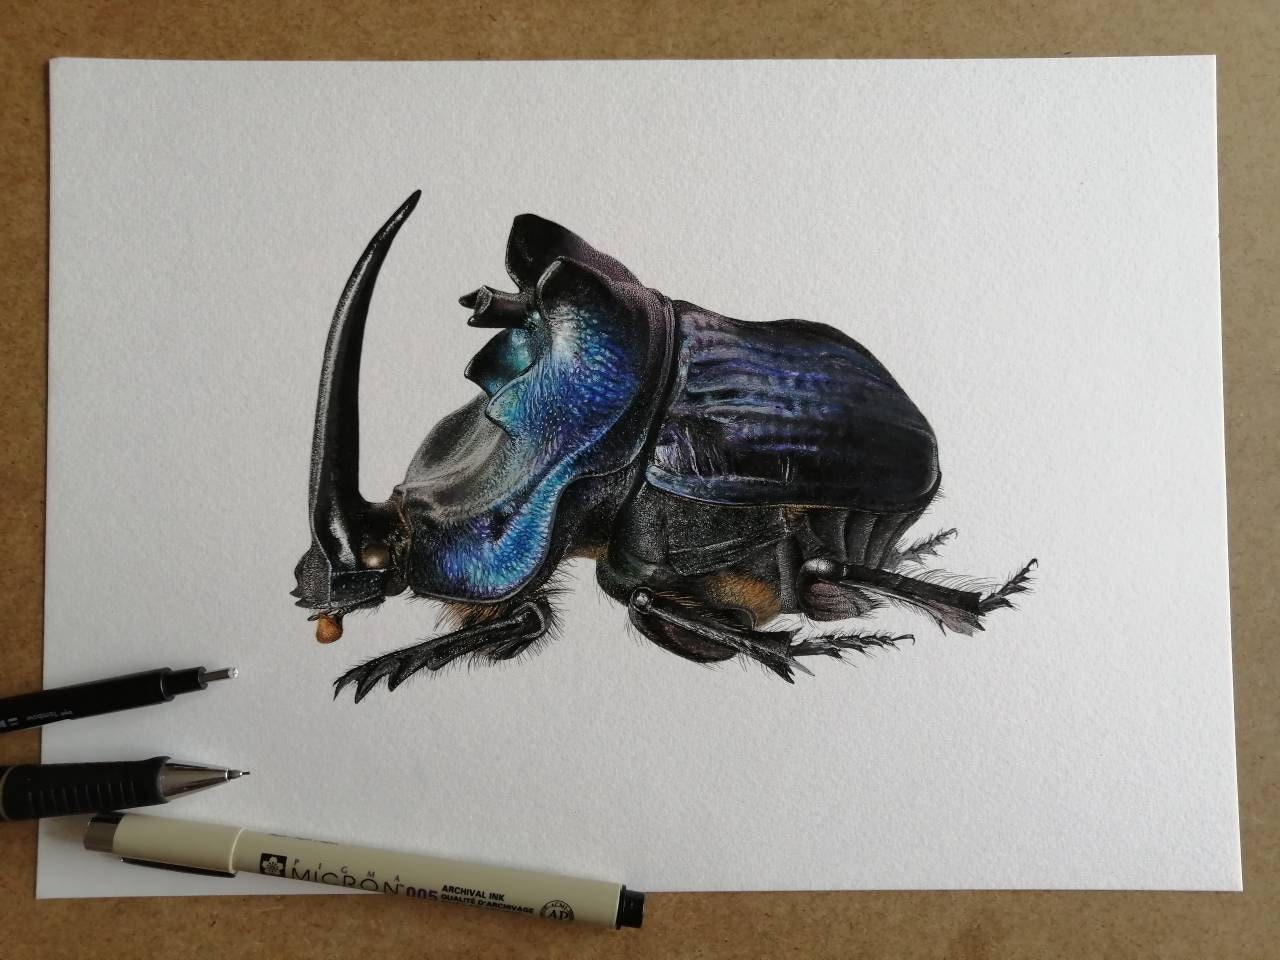 Coprophanaeus lancifer A4 size limited edition art print, signed and numbered. Scarab Beetle